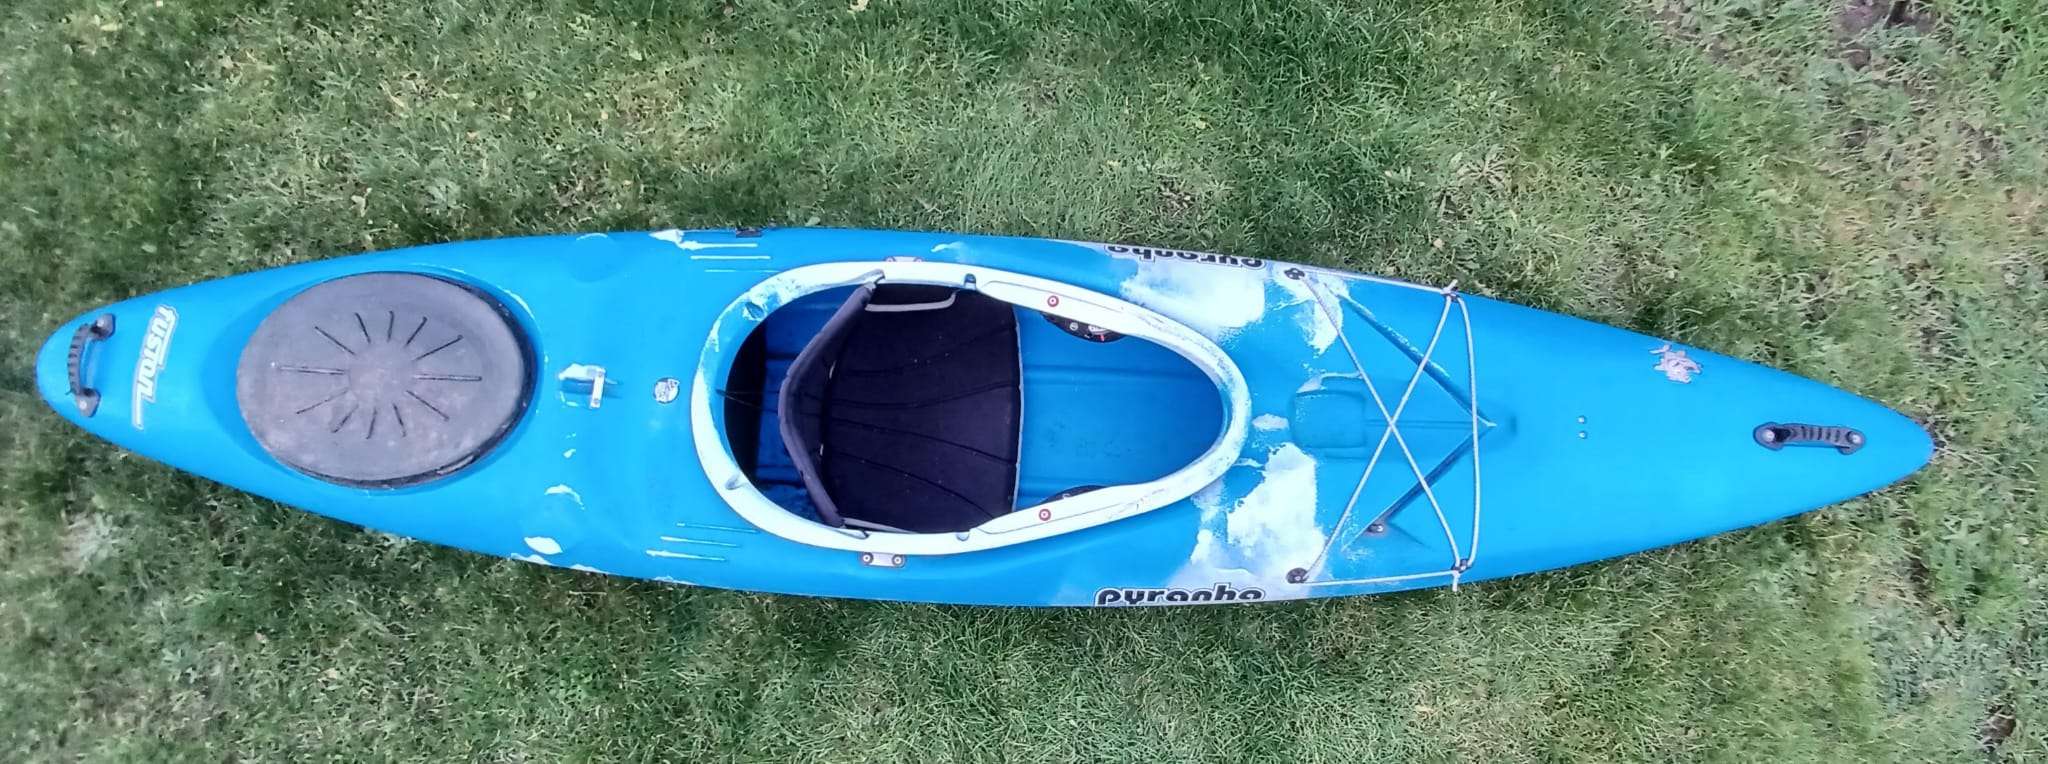 A blue kayak on grass

Description automatically generated